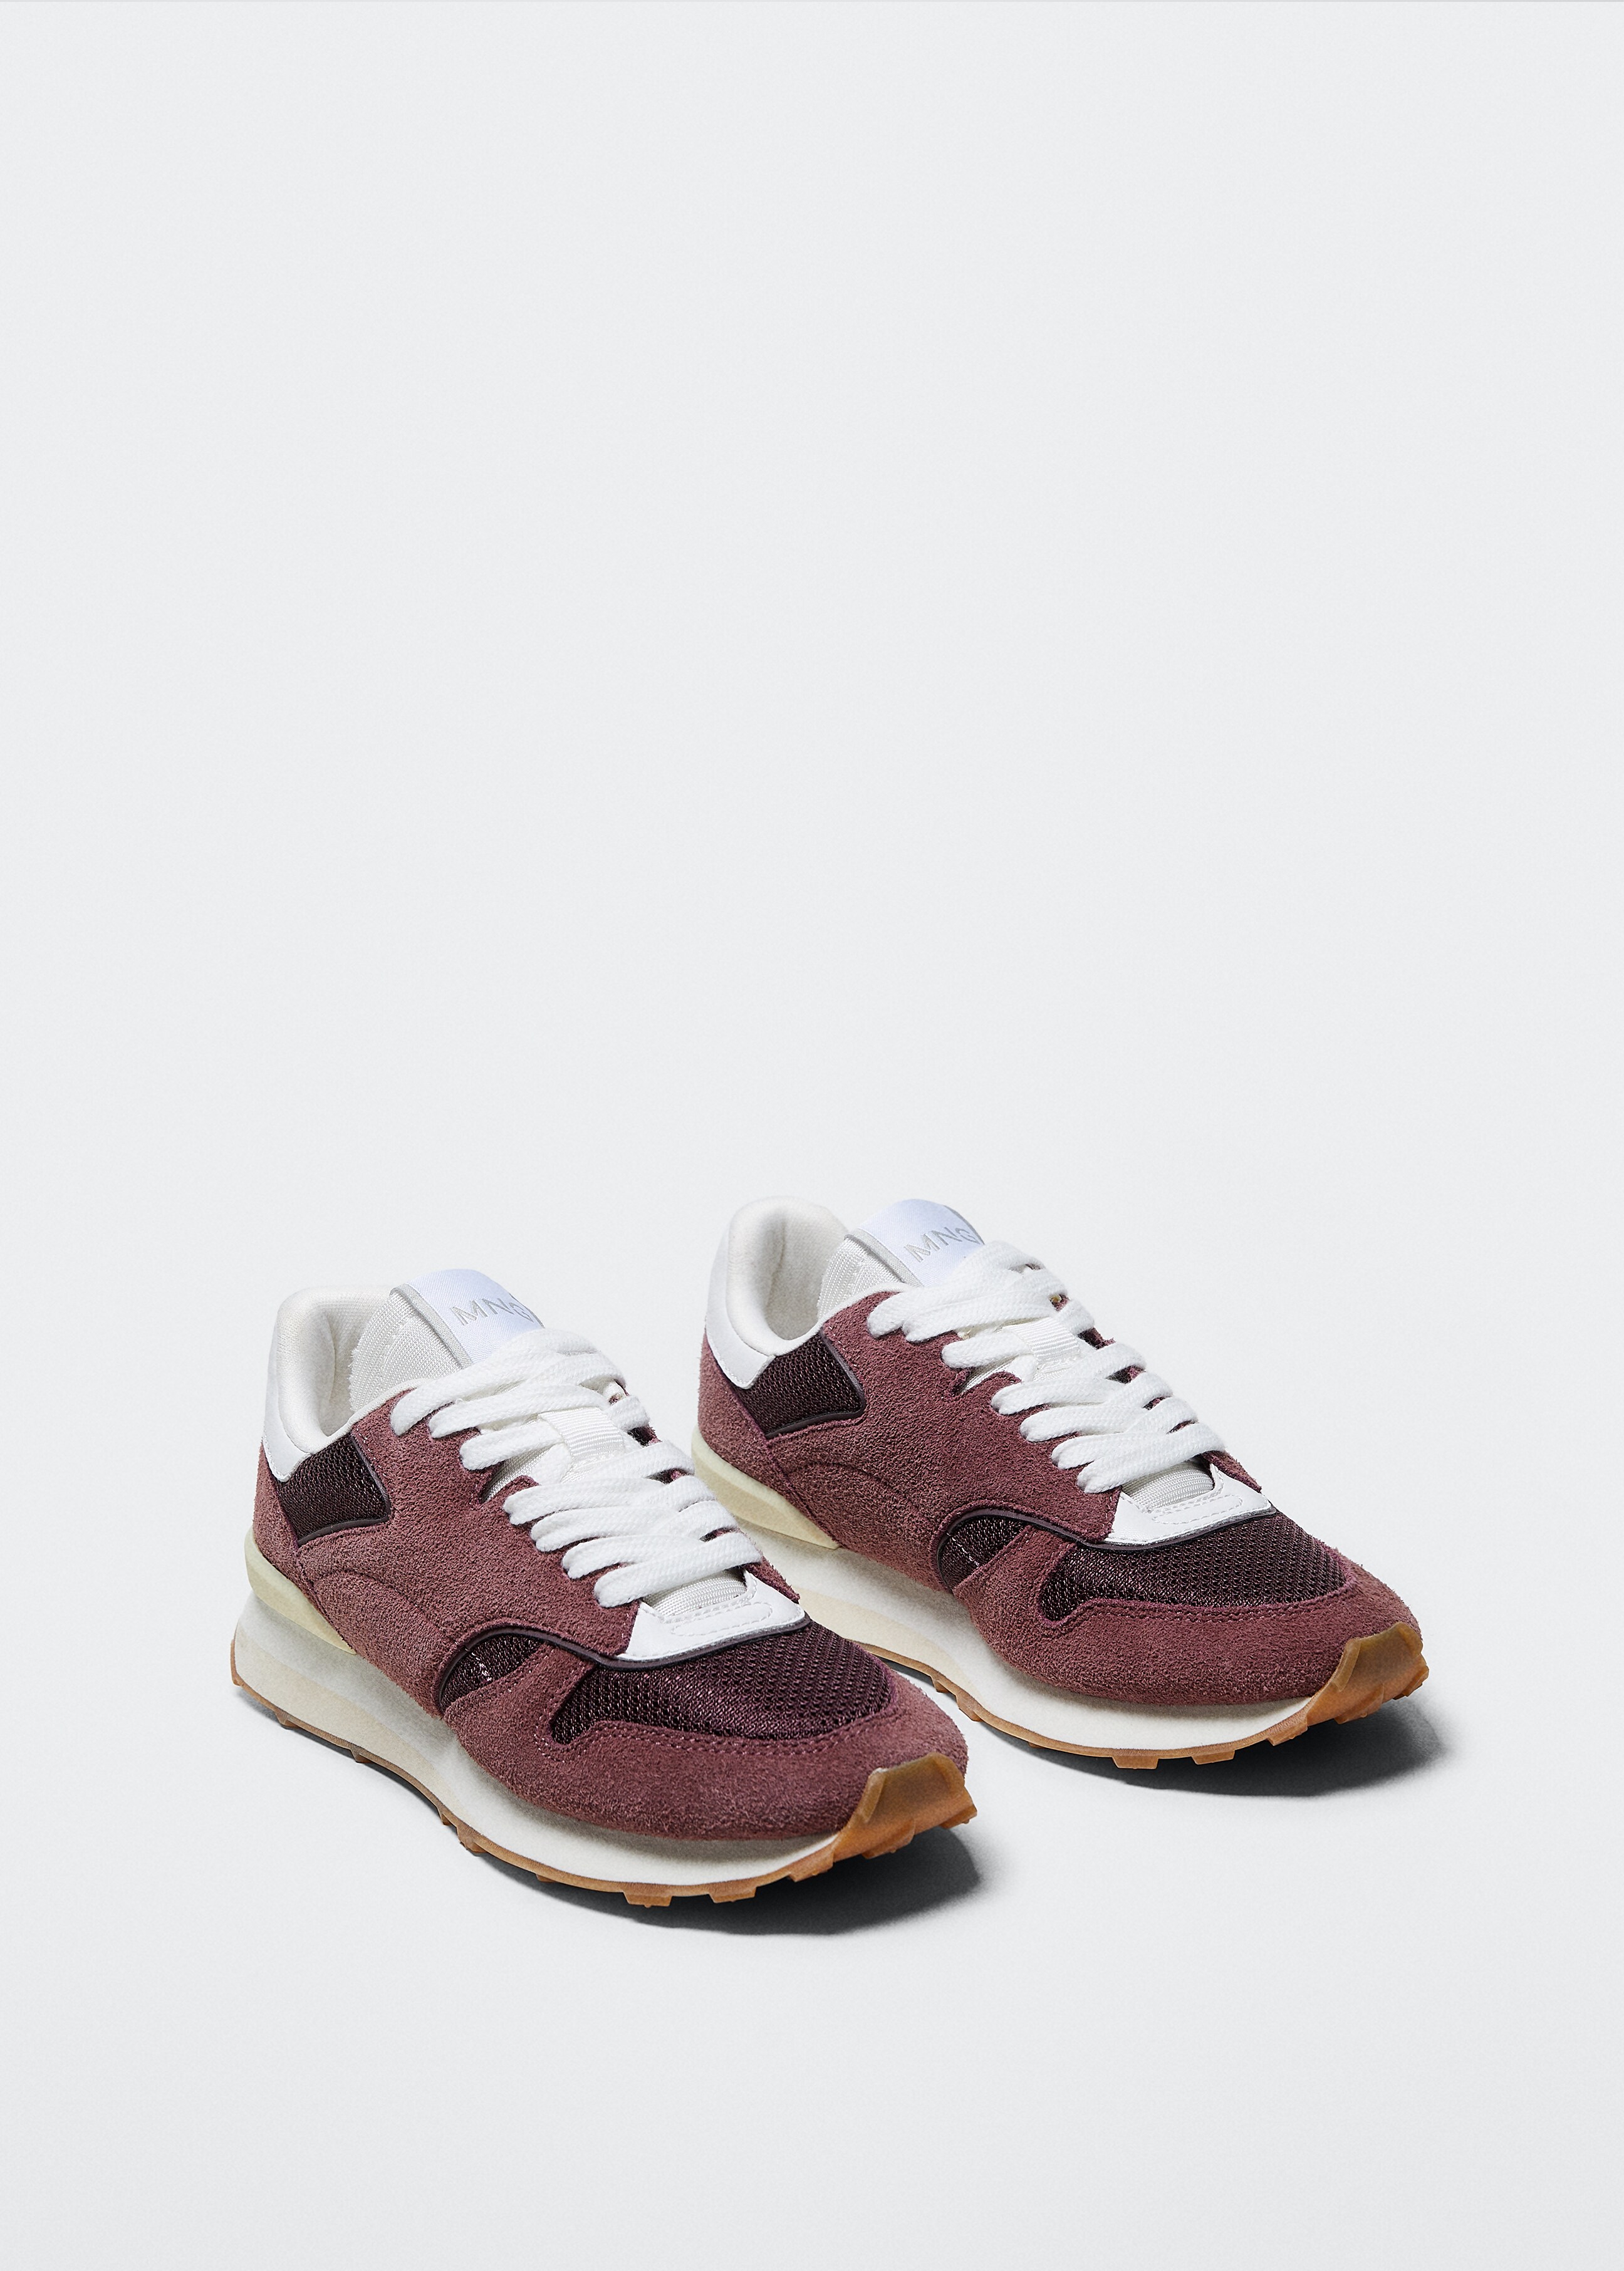 Lace-up suede sneakers - Medium plane